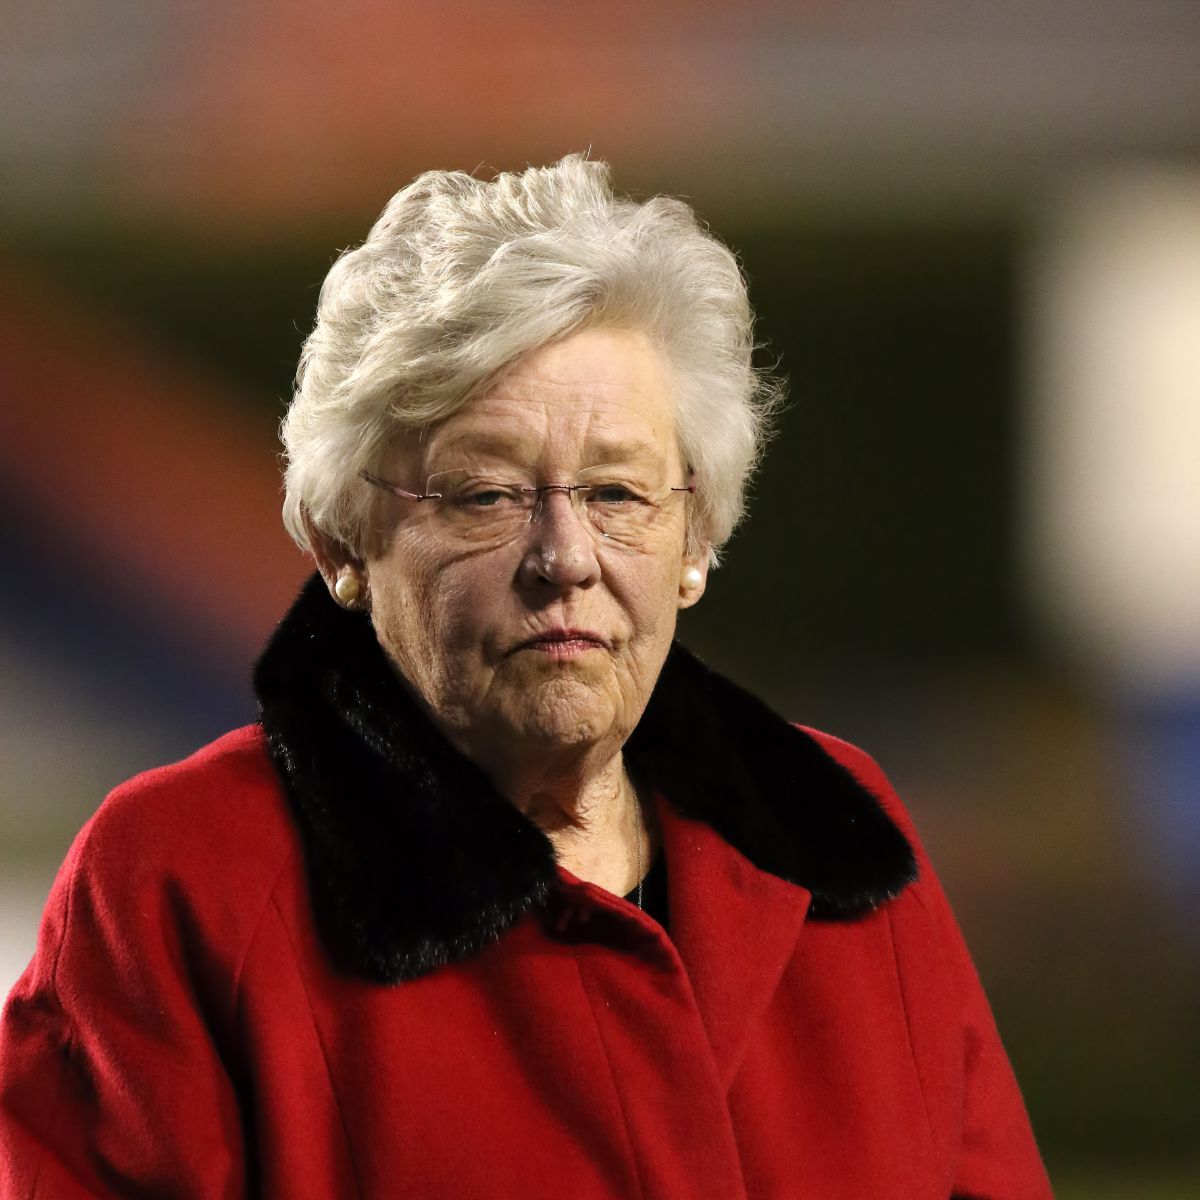 kay-ivey-net-worth-husband-famous-people-today